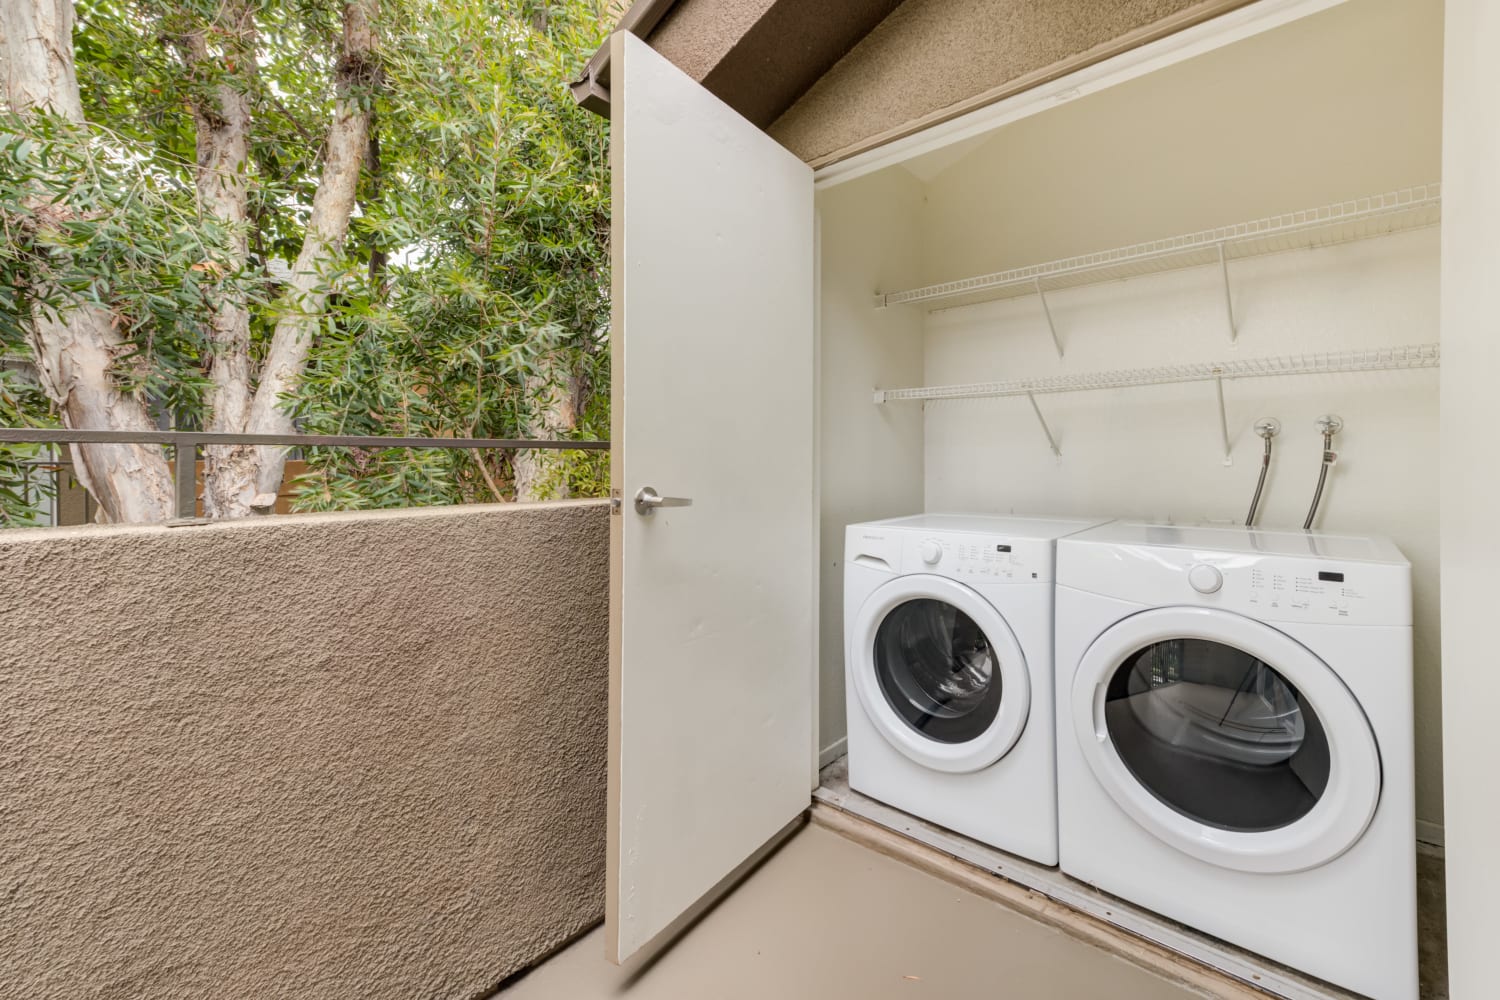 Conveniently located washer and dryer at Seapointe Villas in Costa Mesa, California